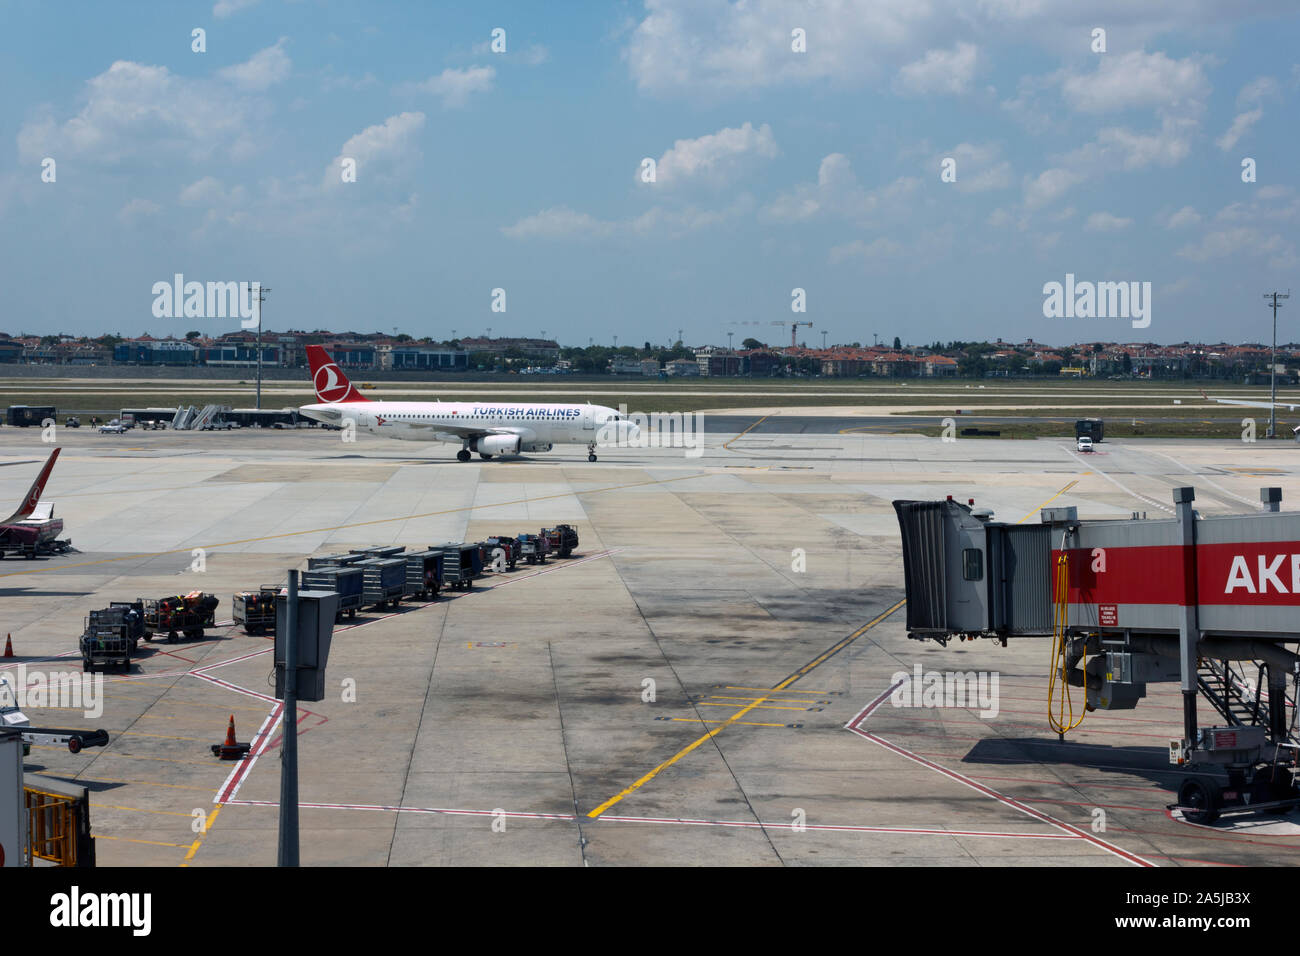 Turkish Airlines plane arriving into Istanbul airport, Istanbul, Turkey. Stock Photo